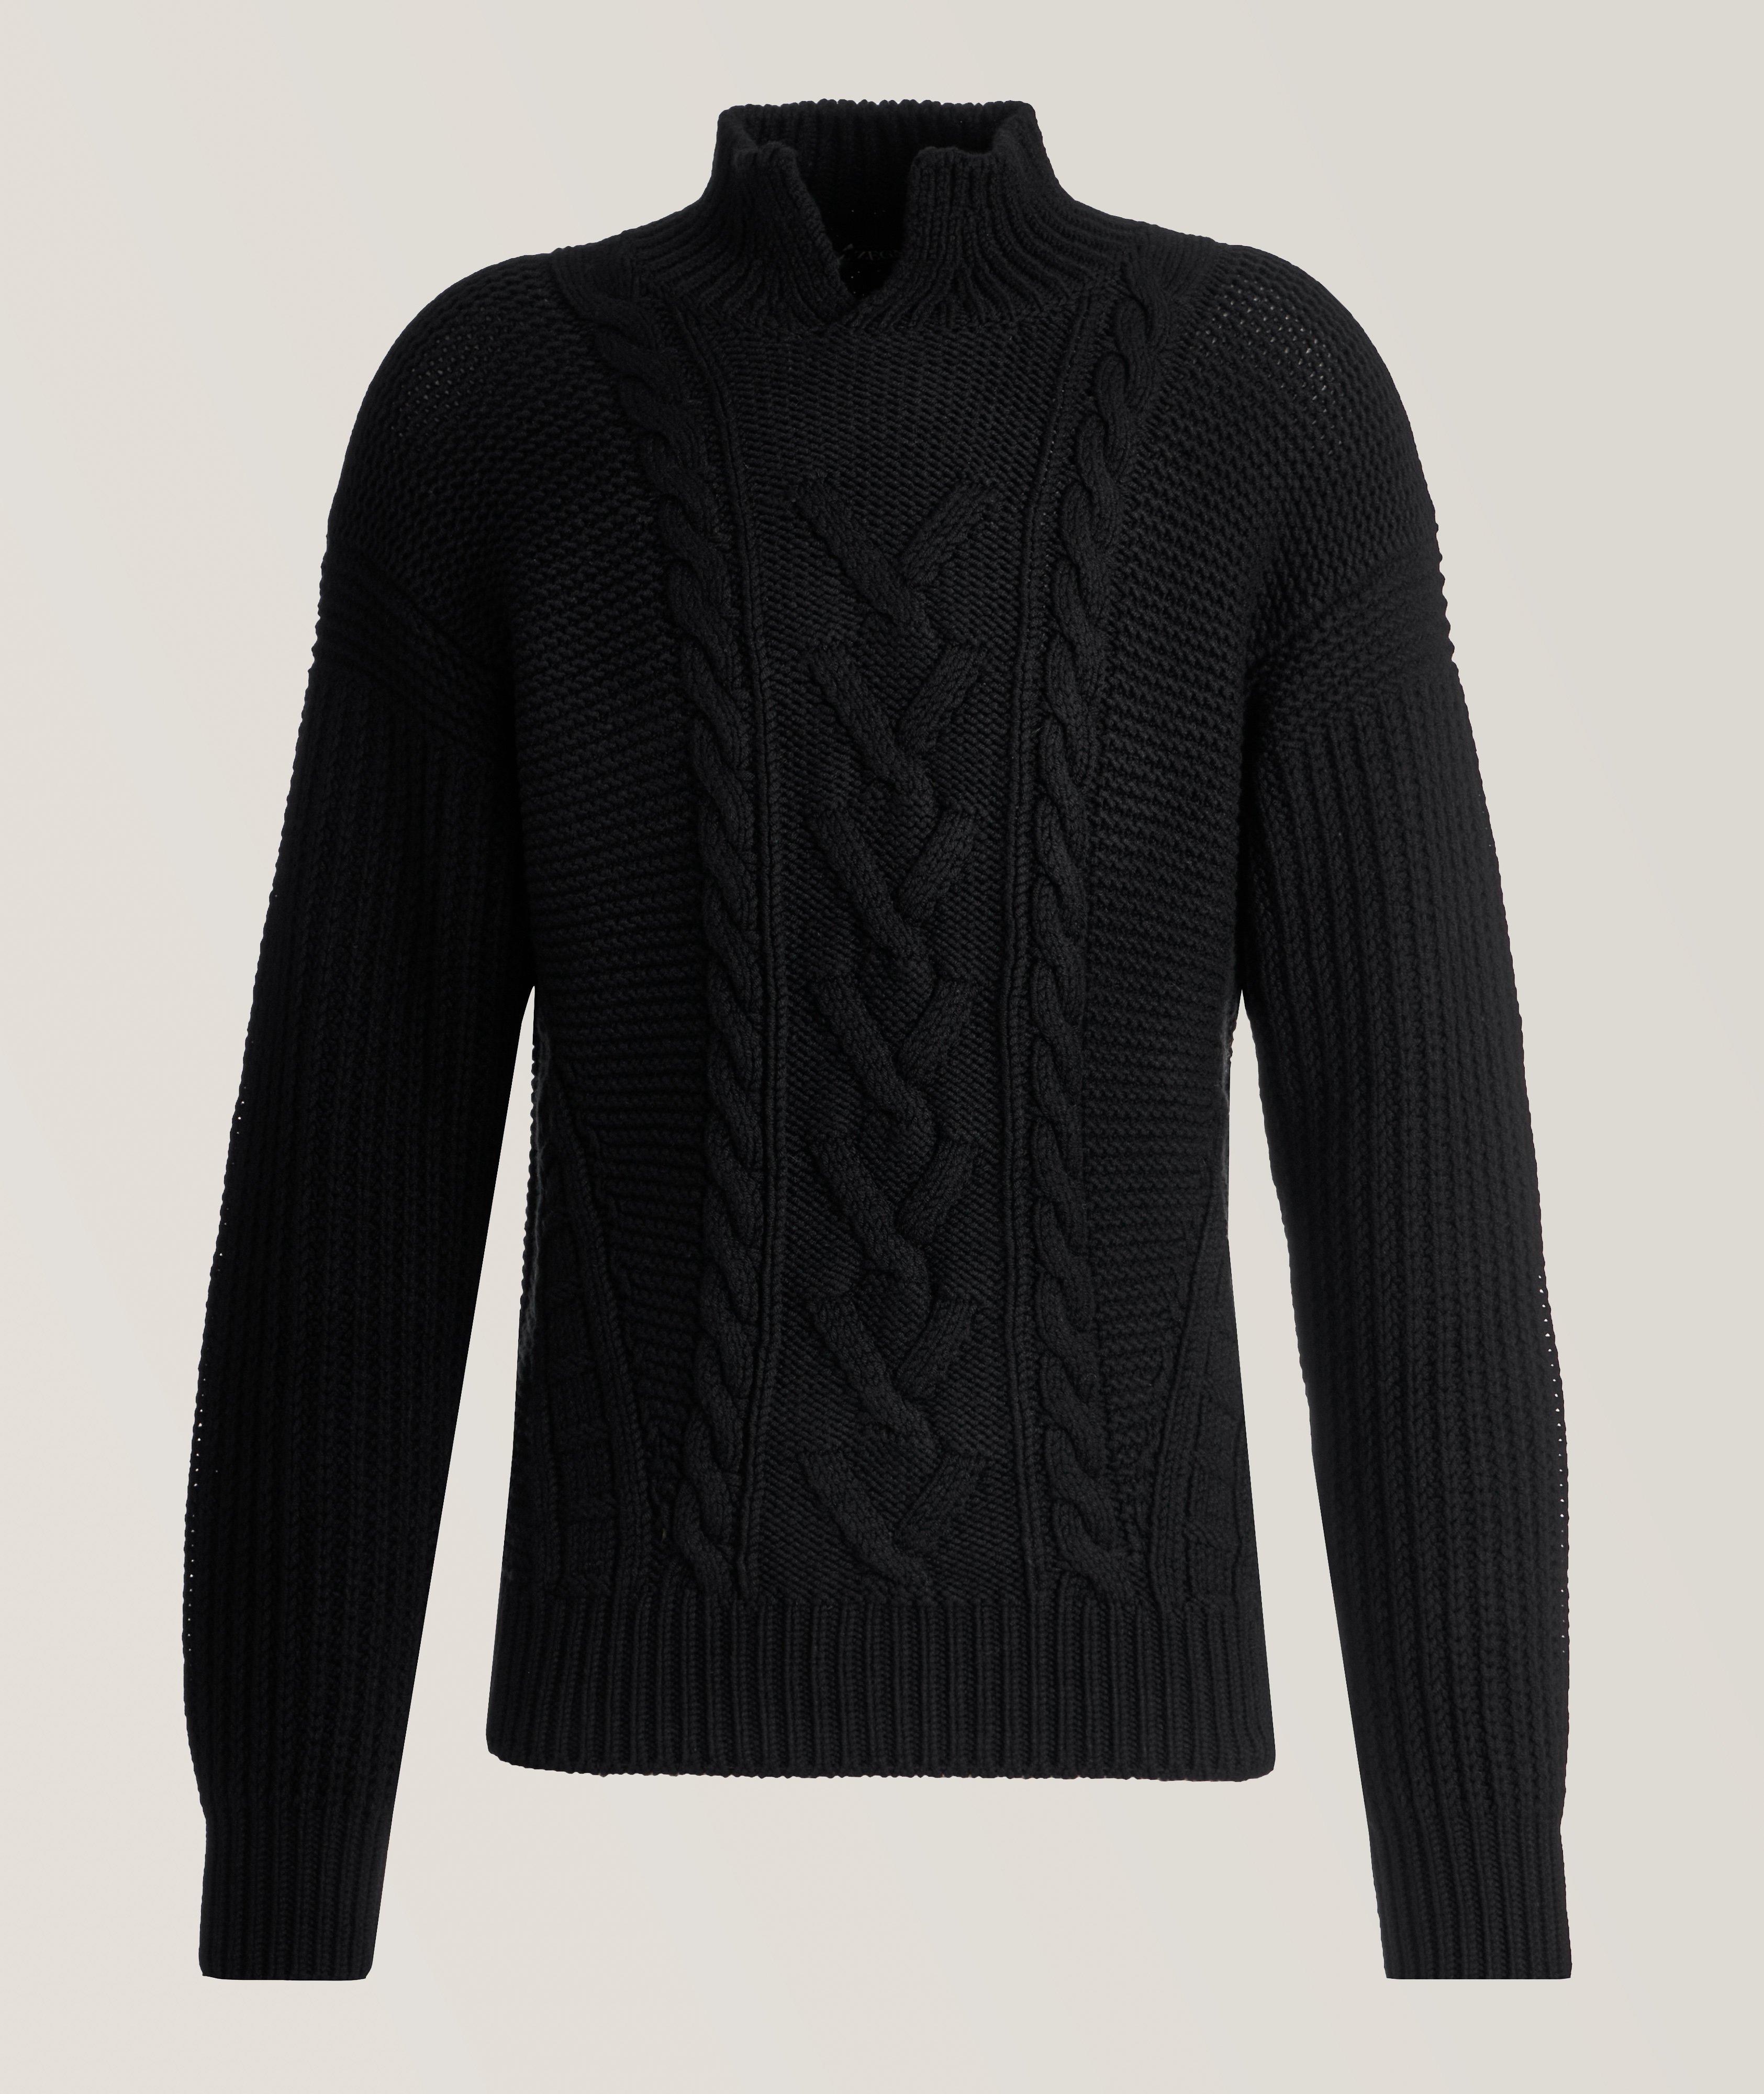 Oasi Cashmere Cable Knit Sweater image 0